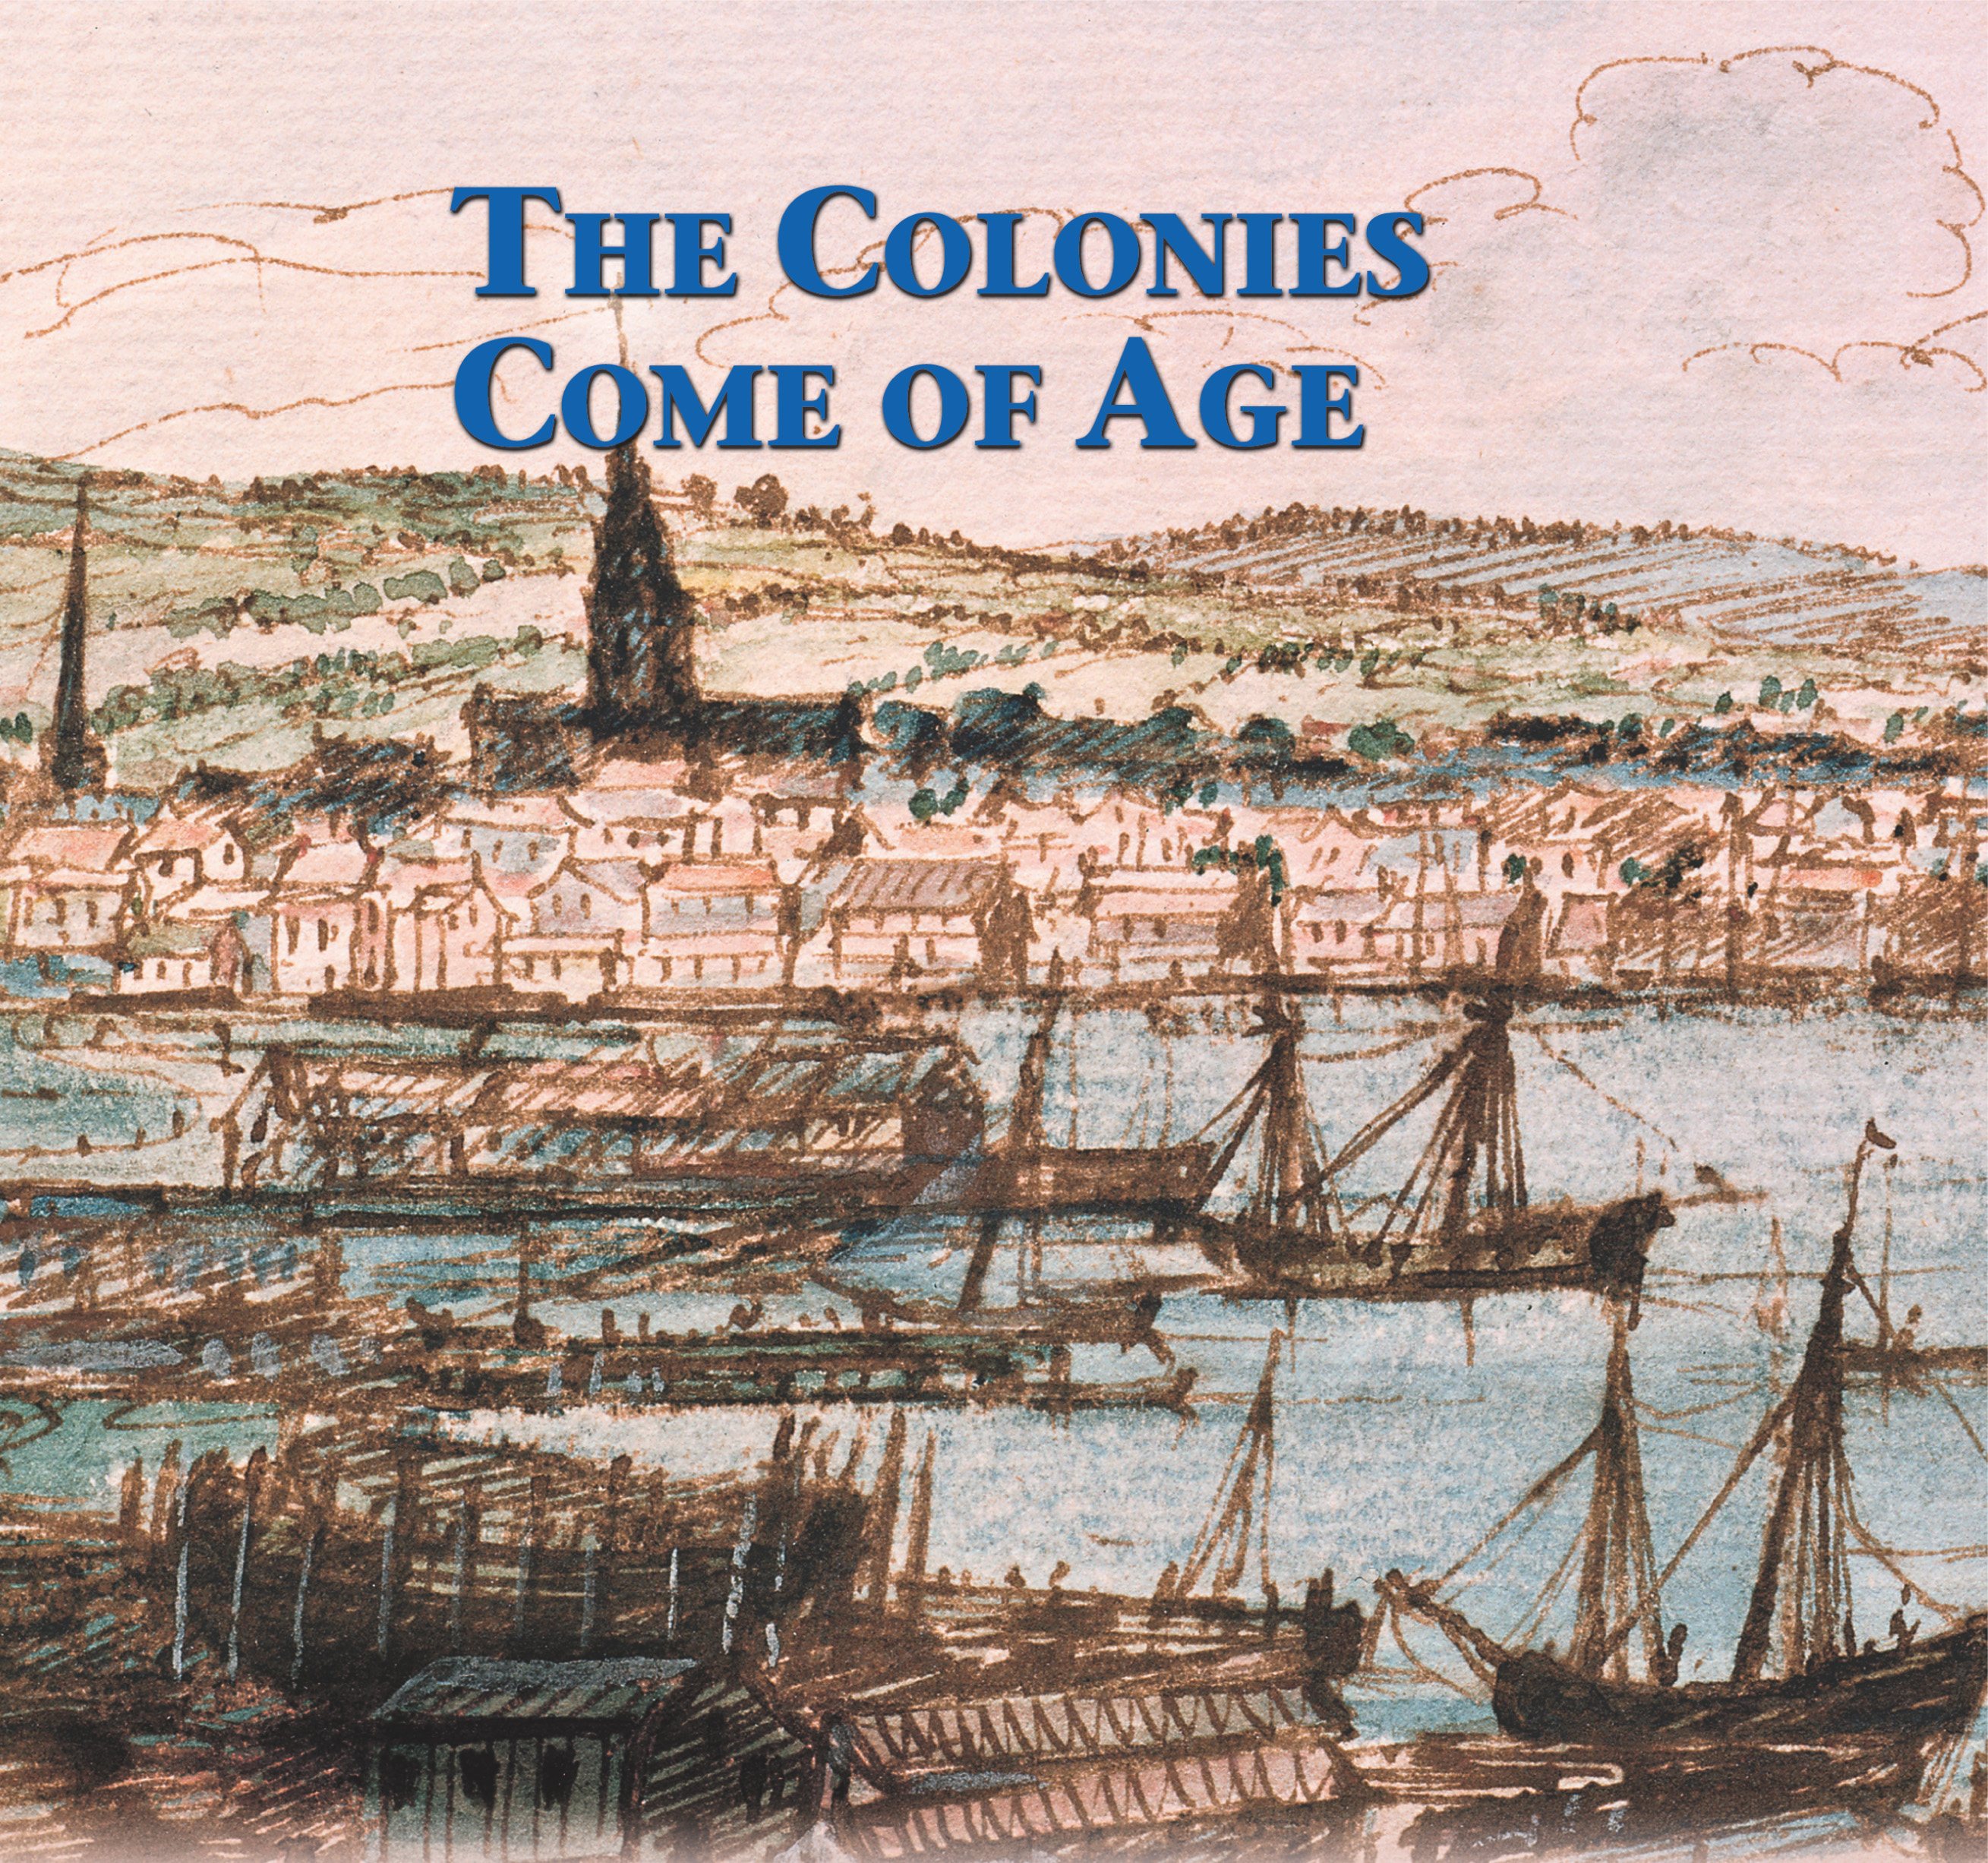 A painting shows a seaport city with wooden sailing ships in the harbor. A title: The Colonies Come of Age.